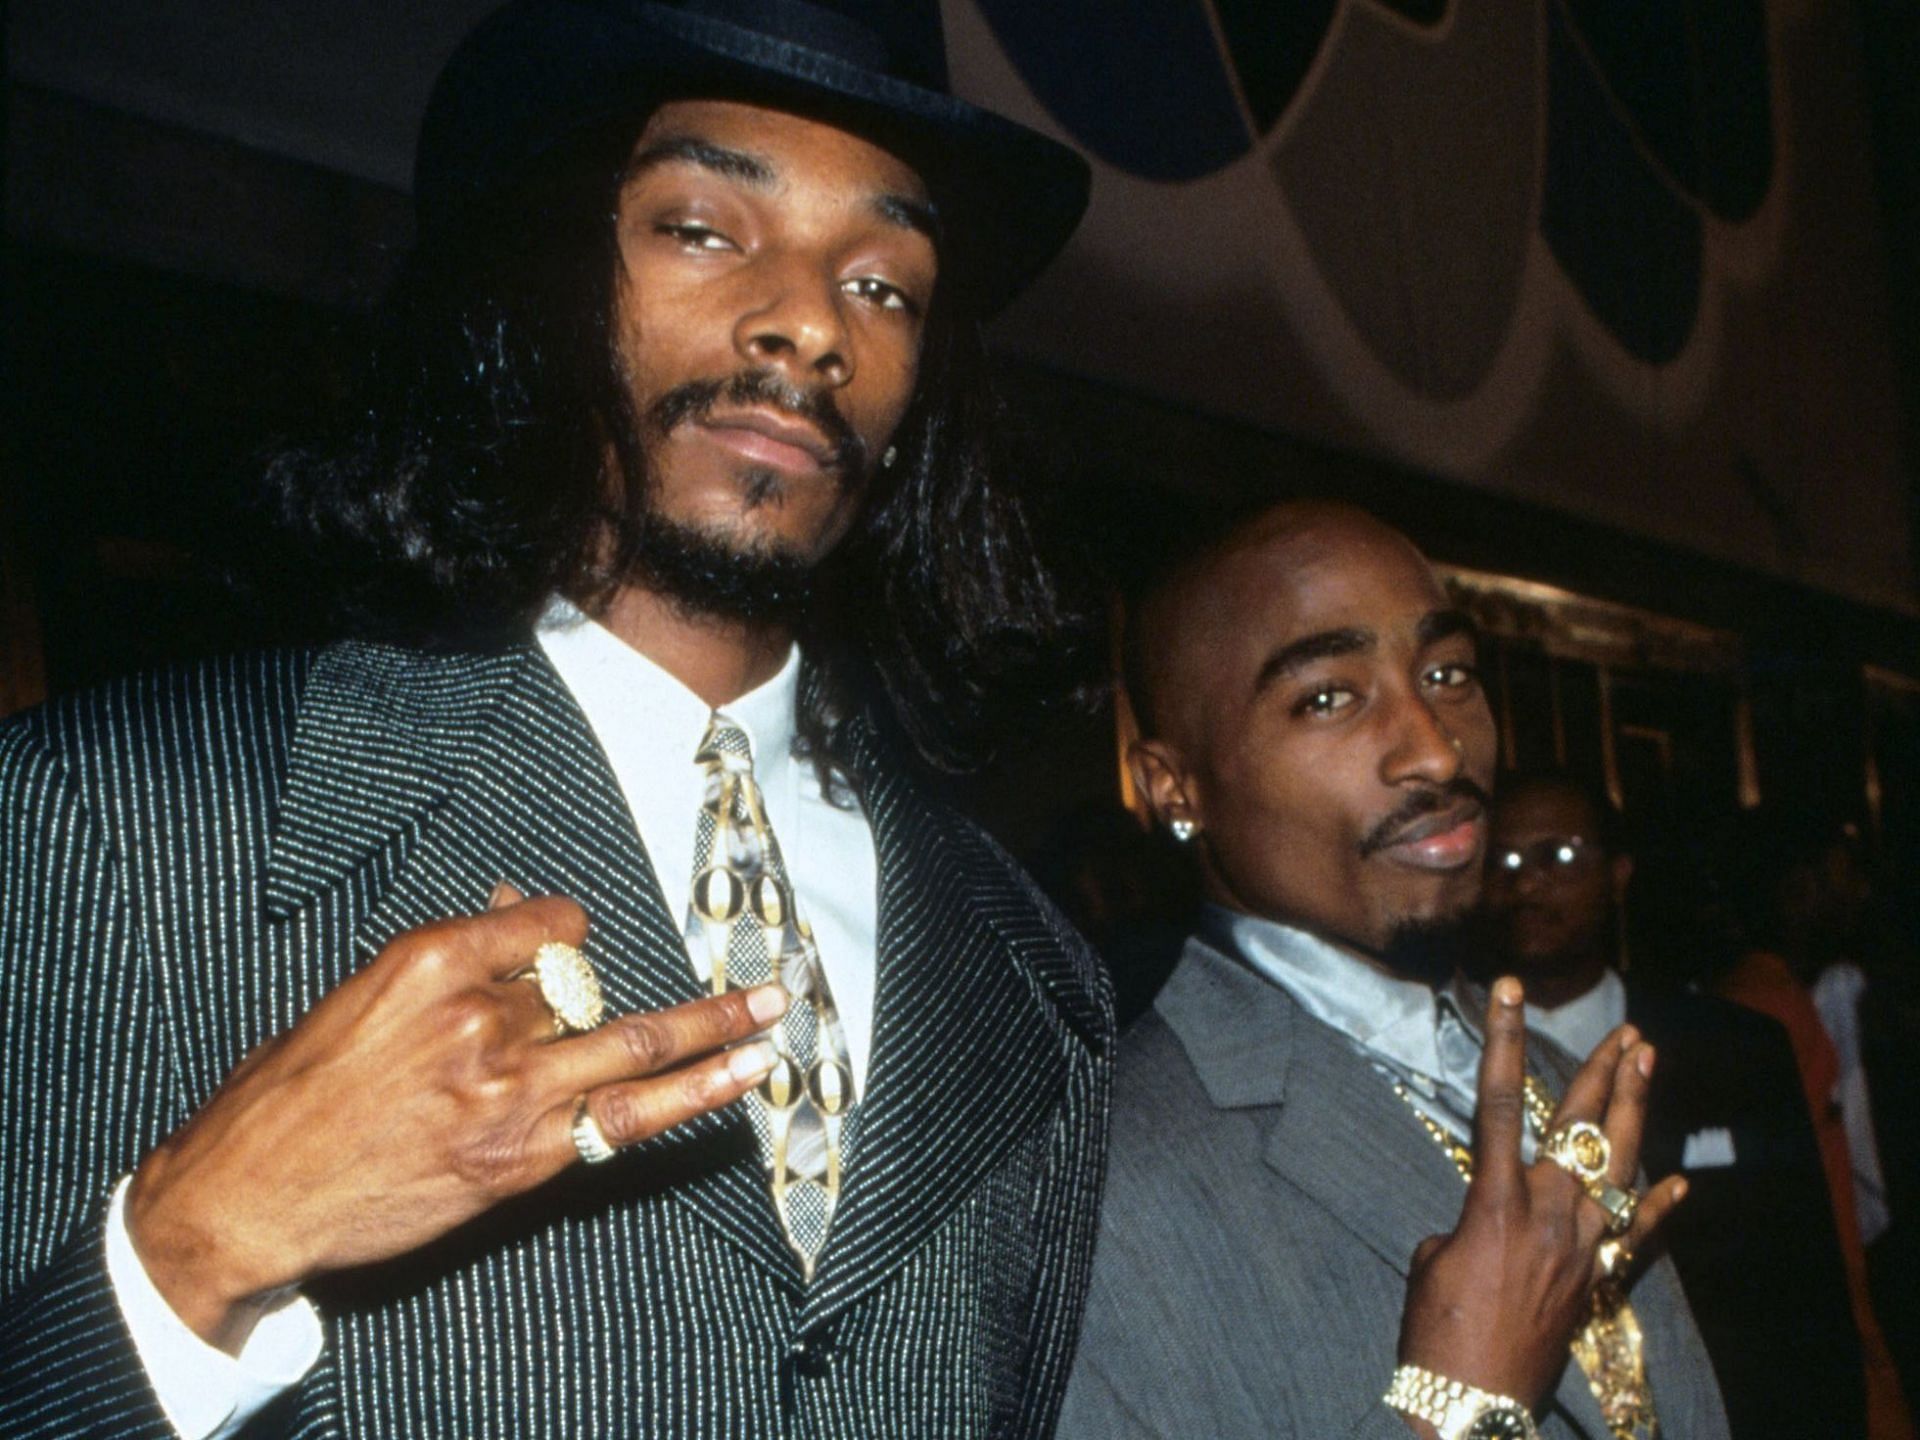 Snoop Dogg and Tupac Shakur at the 1996 MTV Music Video Awards (Image via Kevin Mazur Archive/WireImage/Getty Images)